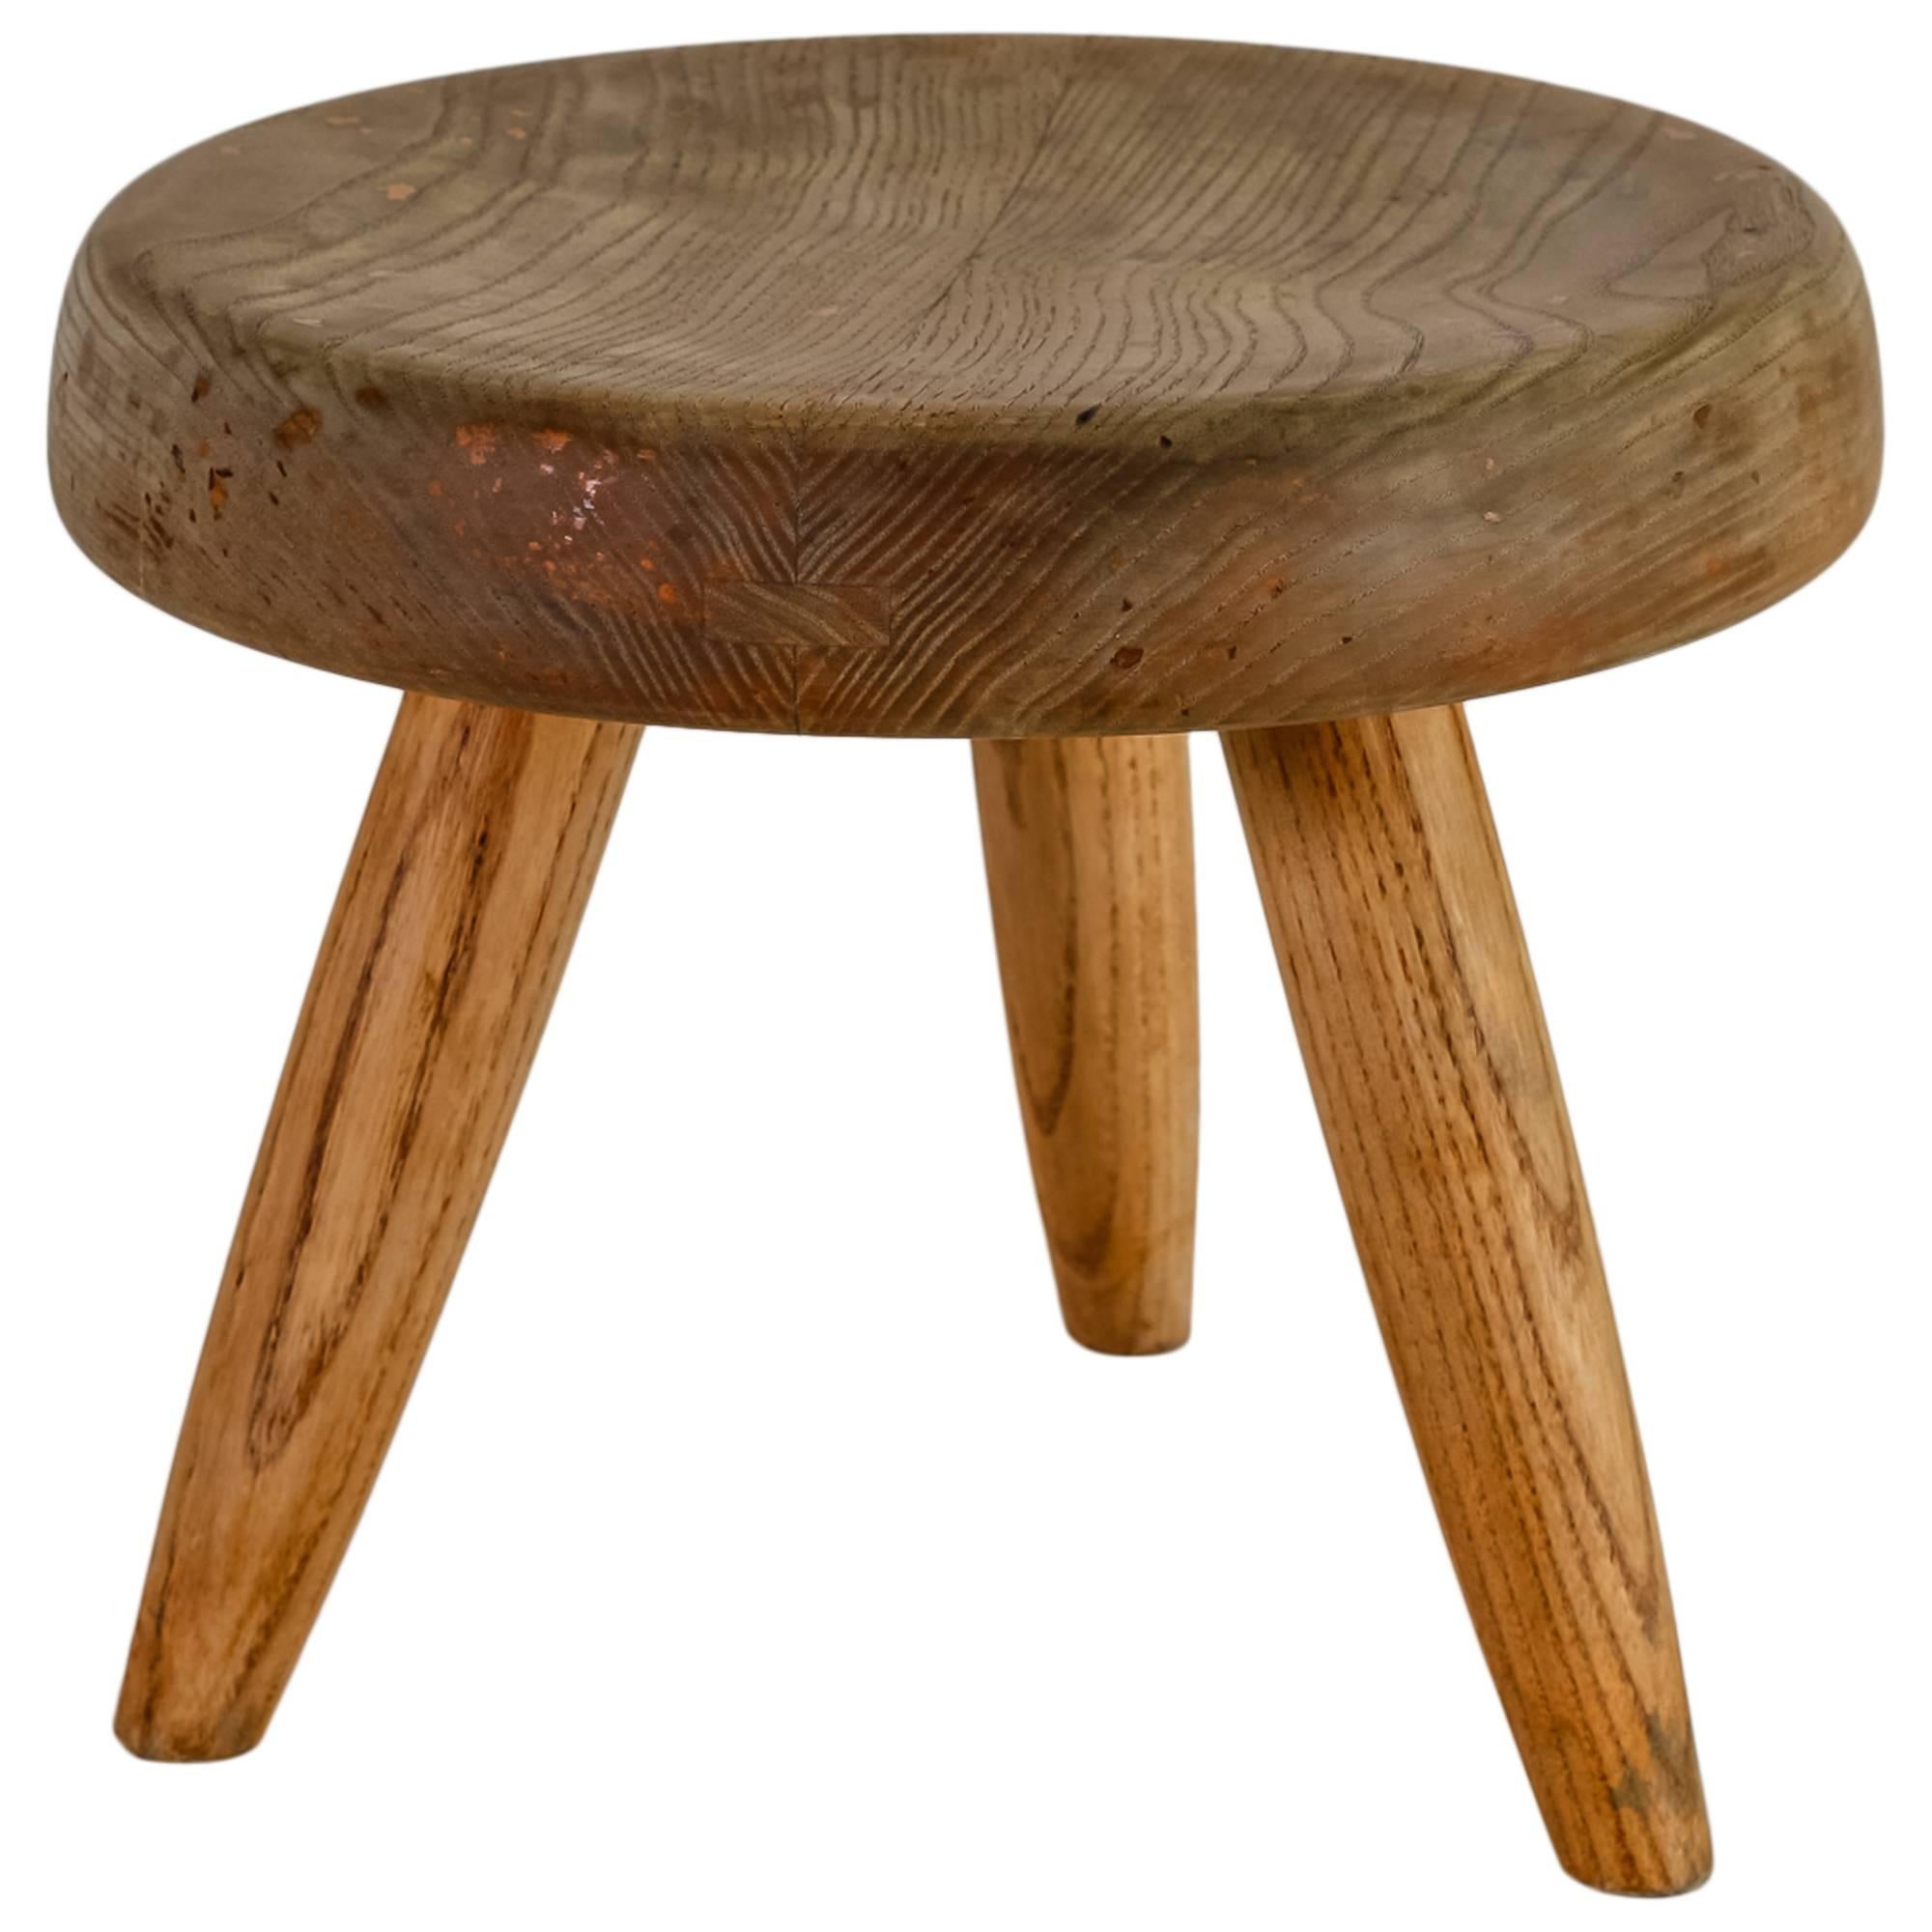 Charlotte Perriand Oak Low Tripod Stool, France, 1950s For Sale